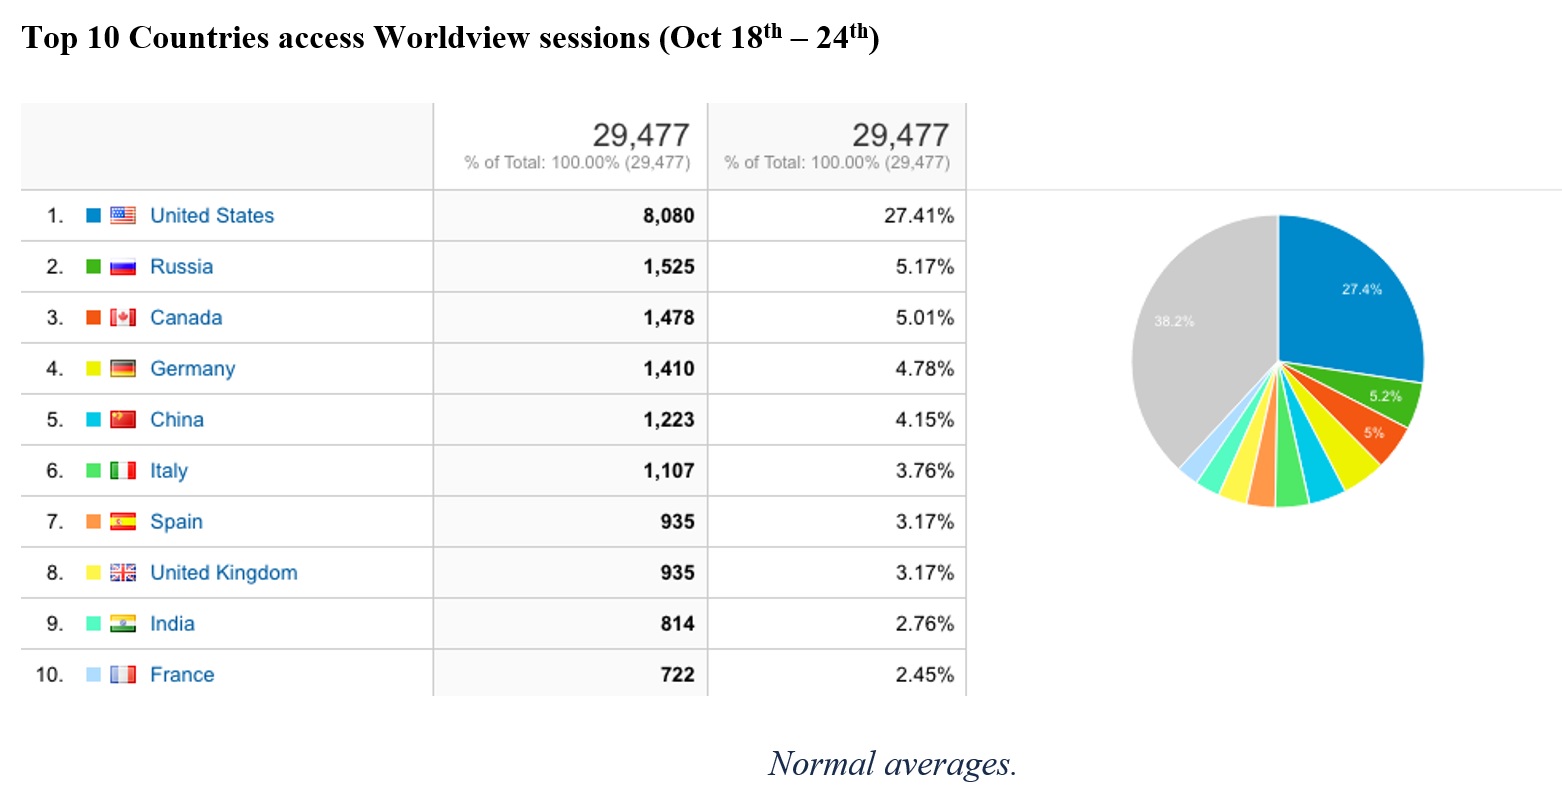 Top 10 countries accessing Worldview sessions (October 18-24)